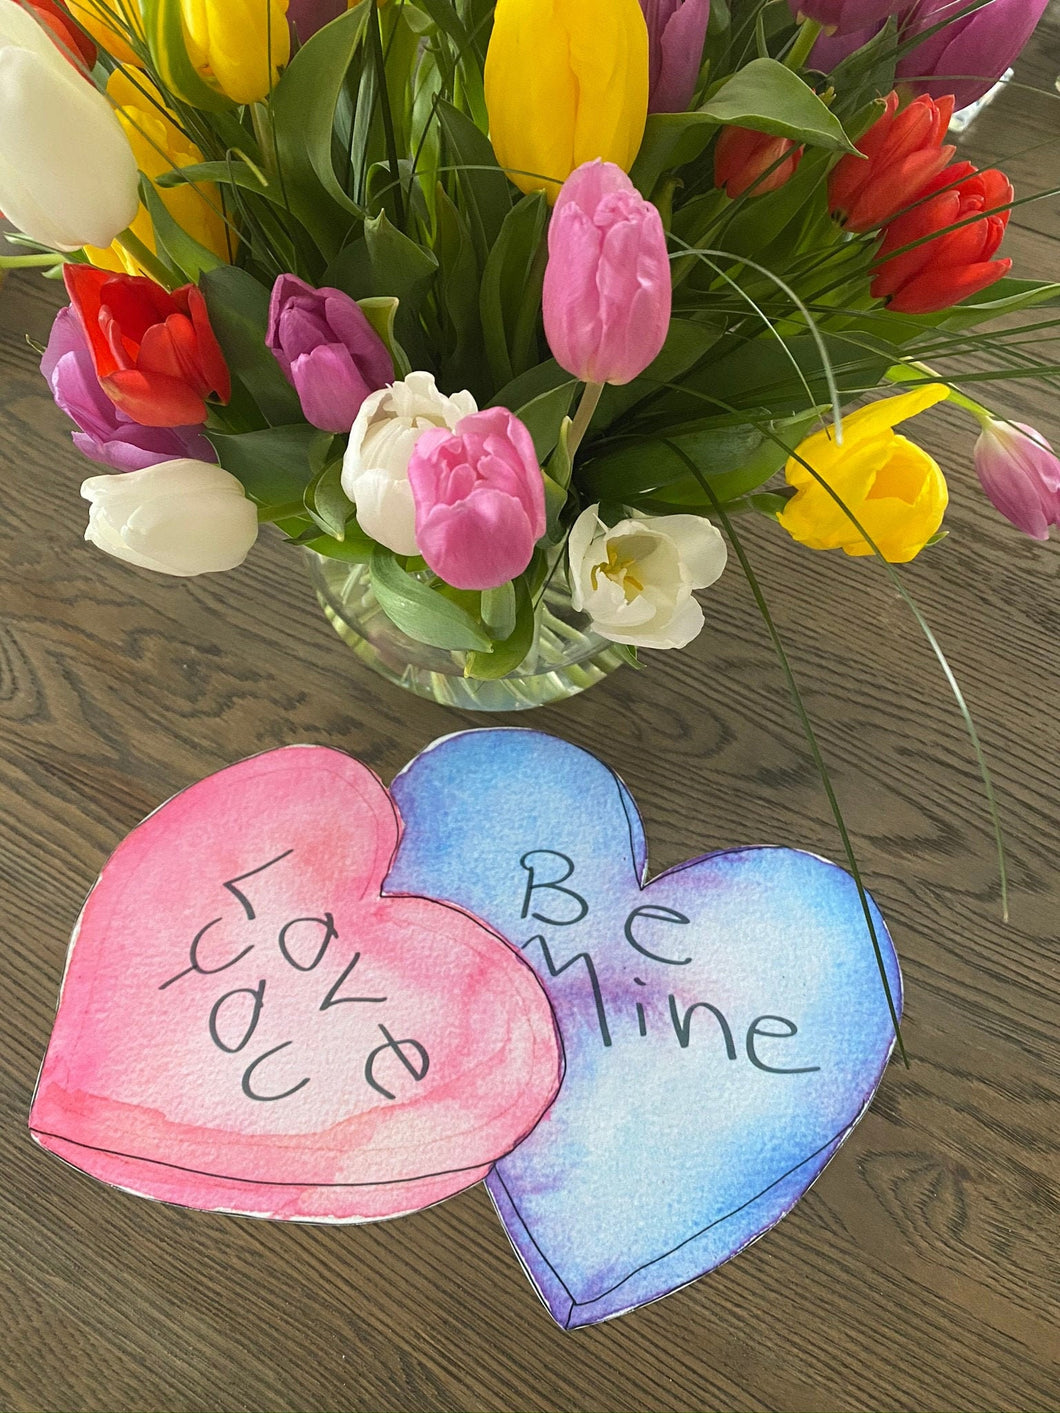 Be Mine Heart Placemats Watercolor Indoor Outdoor Wipeable Table Setting Valentine Galentine Love Wedding Engagement Anniversary Candy Heart